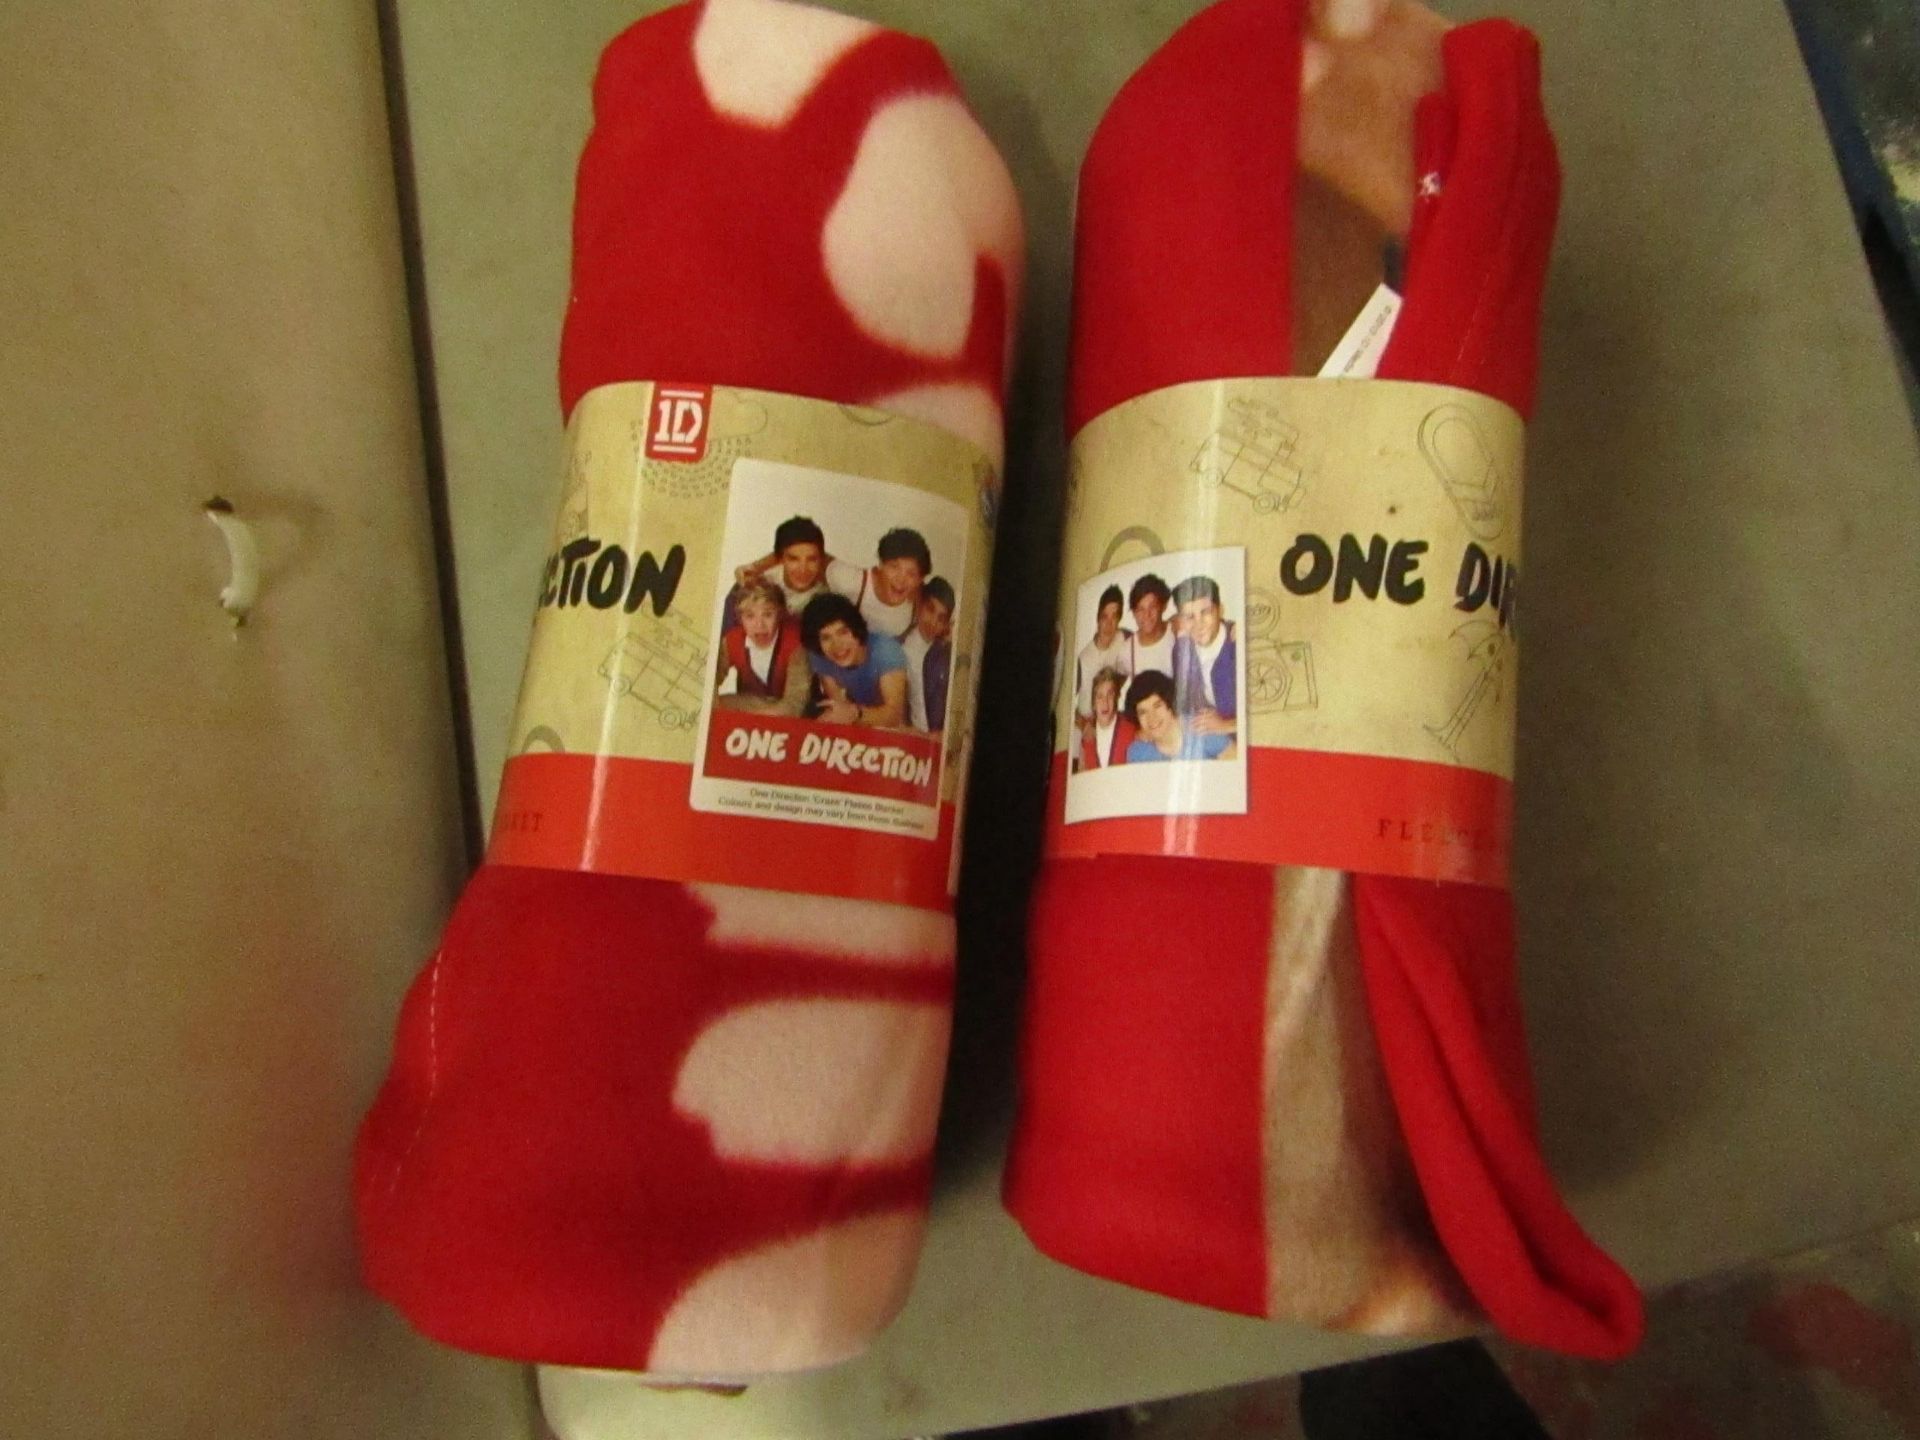 2 x One Direction Fleece Blanket. New with tags